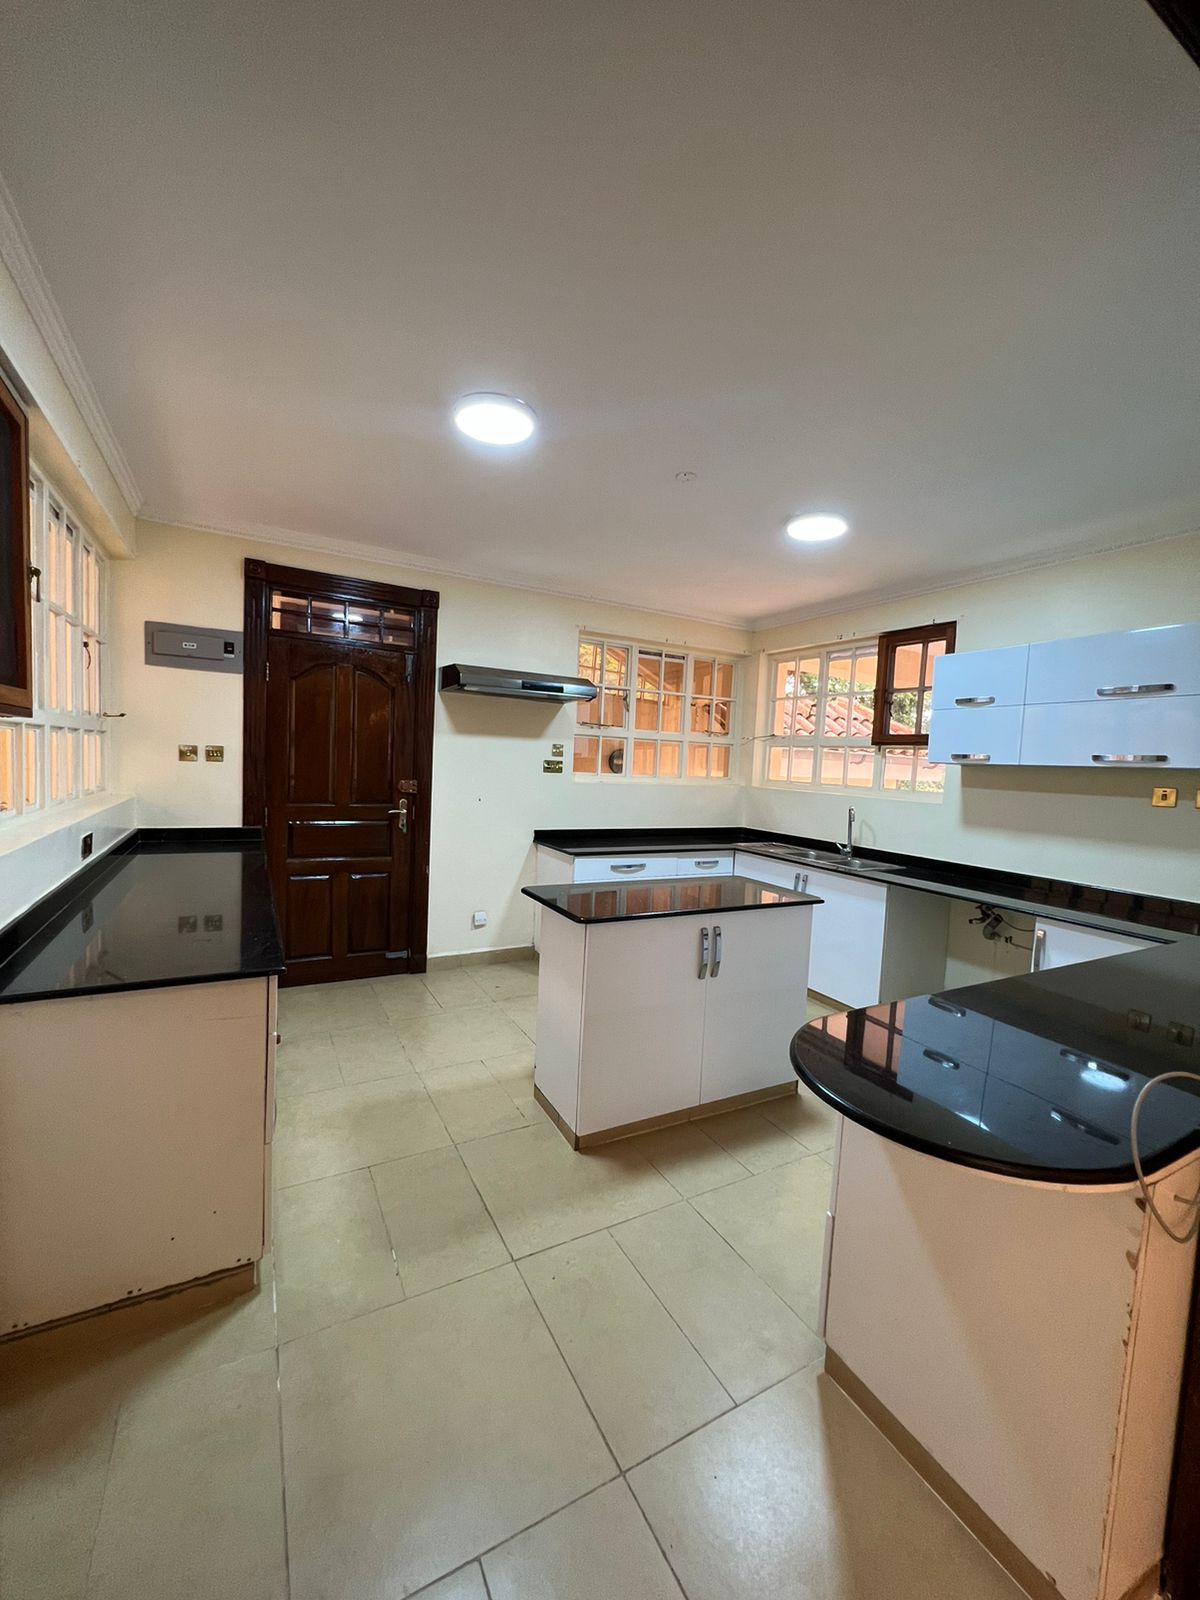 4 bedroom townhouse to let Located in the heart of kyuna Musilli Homes